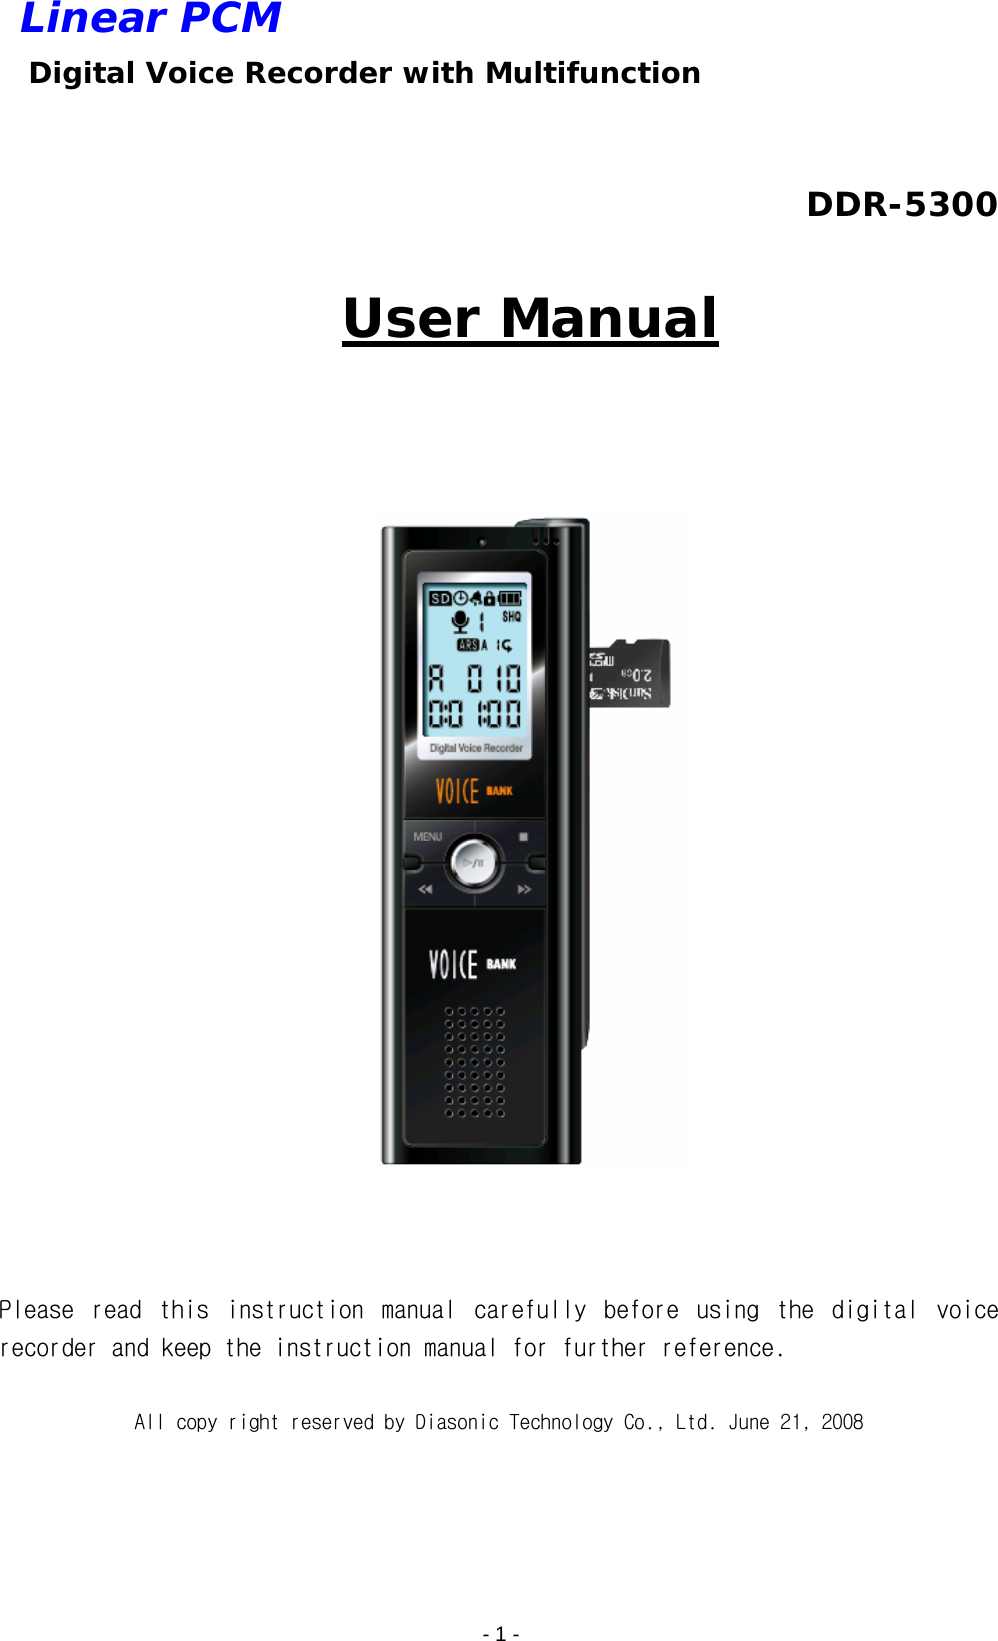    - 1 - Linear PCM  Digital Voice Recorder with Multifunction  DDR-5300  User Manual      Please  read  this  instruction  manual  carefully  before  using  the  digital  voice recorder and keep the instruction manual for further reference.   All copy right reserved by Diasonic Technology Co., Ltd. June 21, 2008 